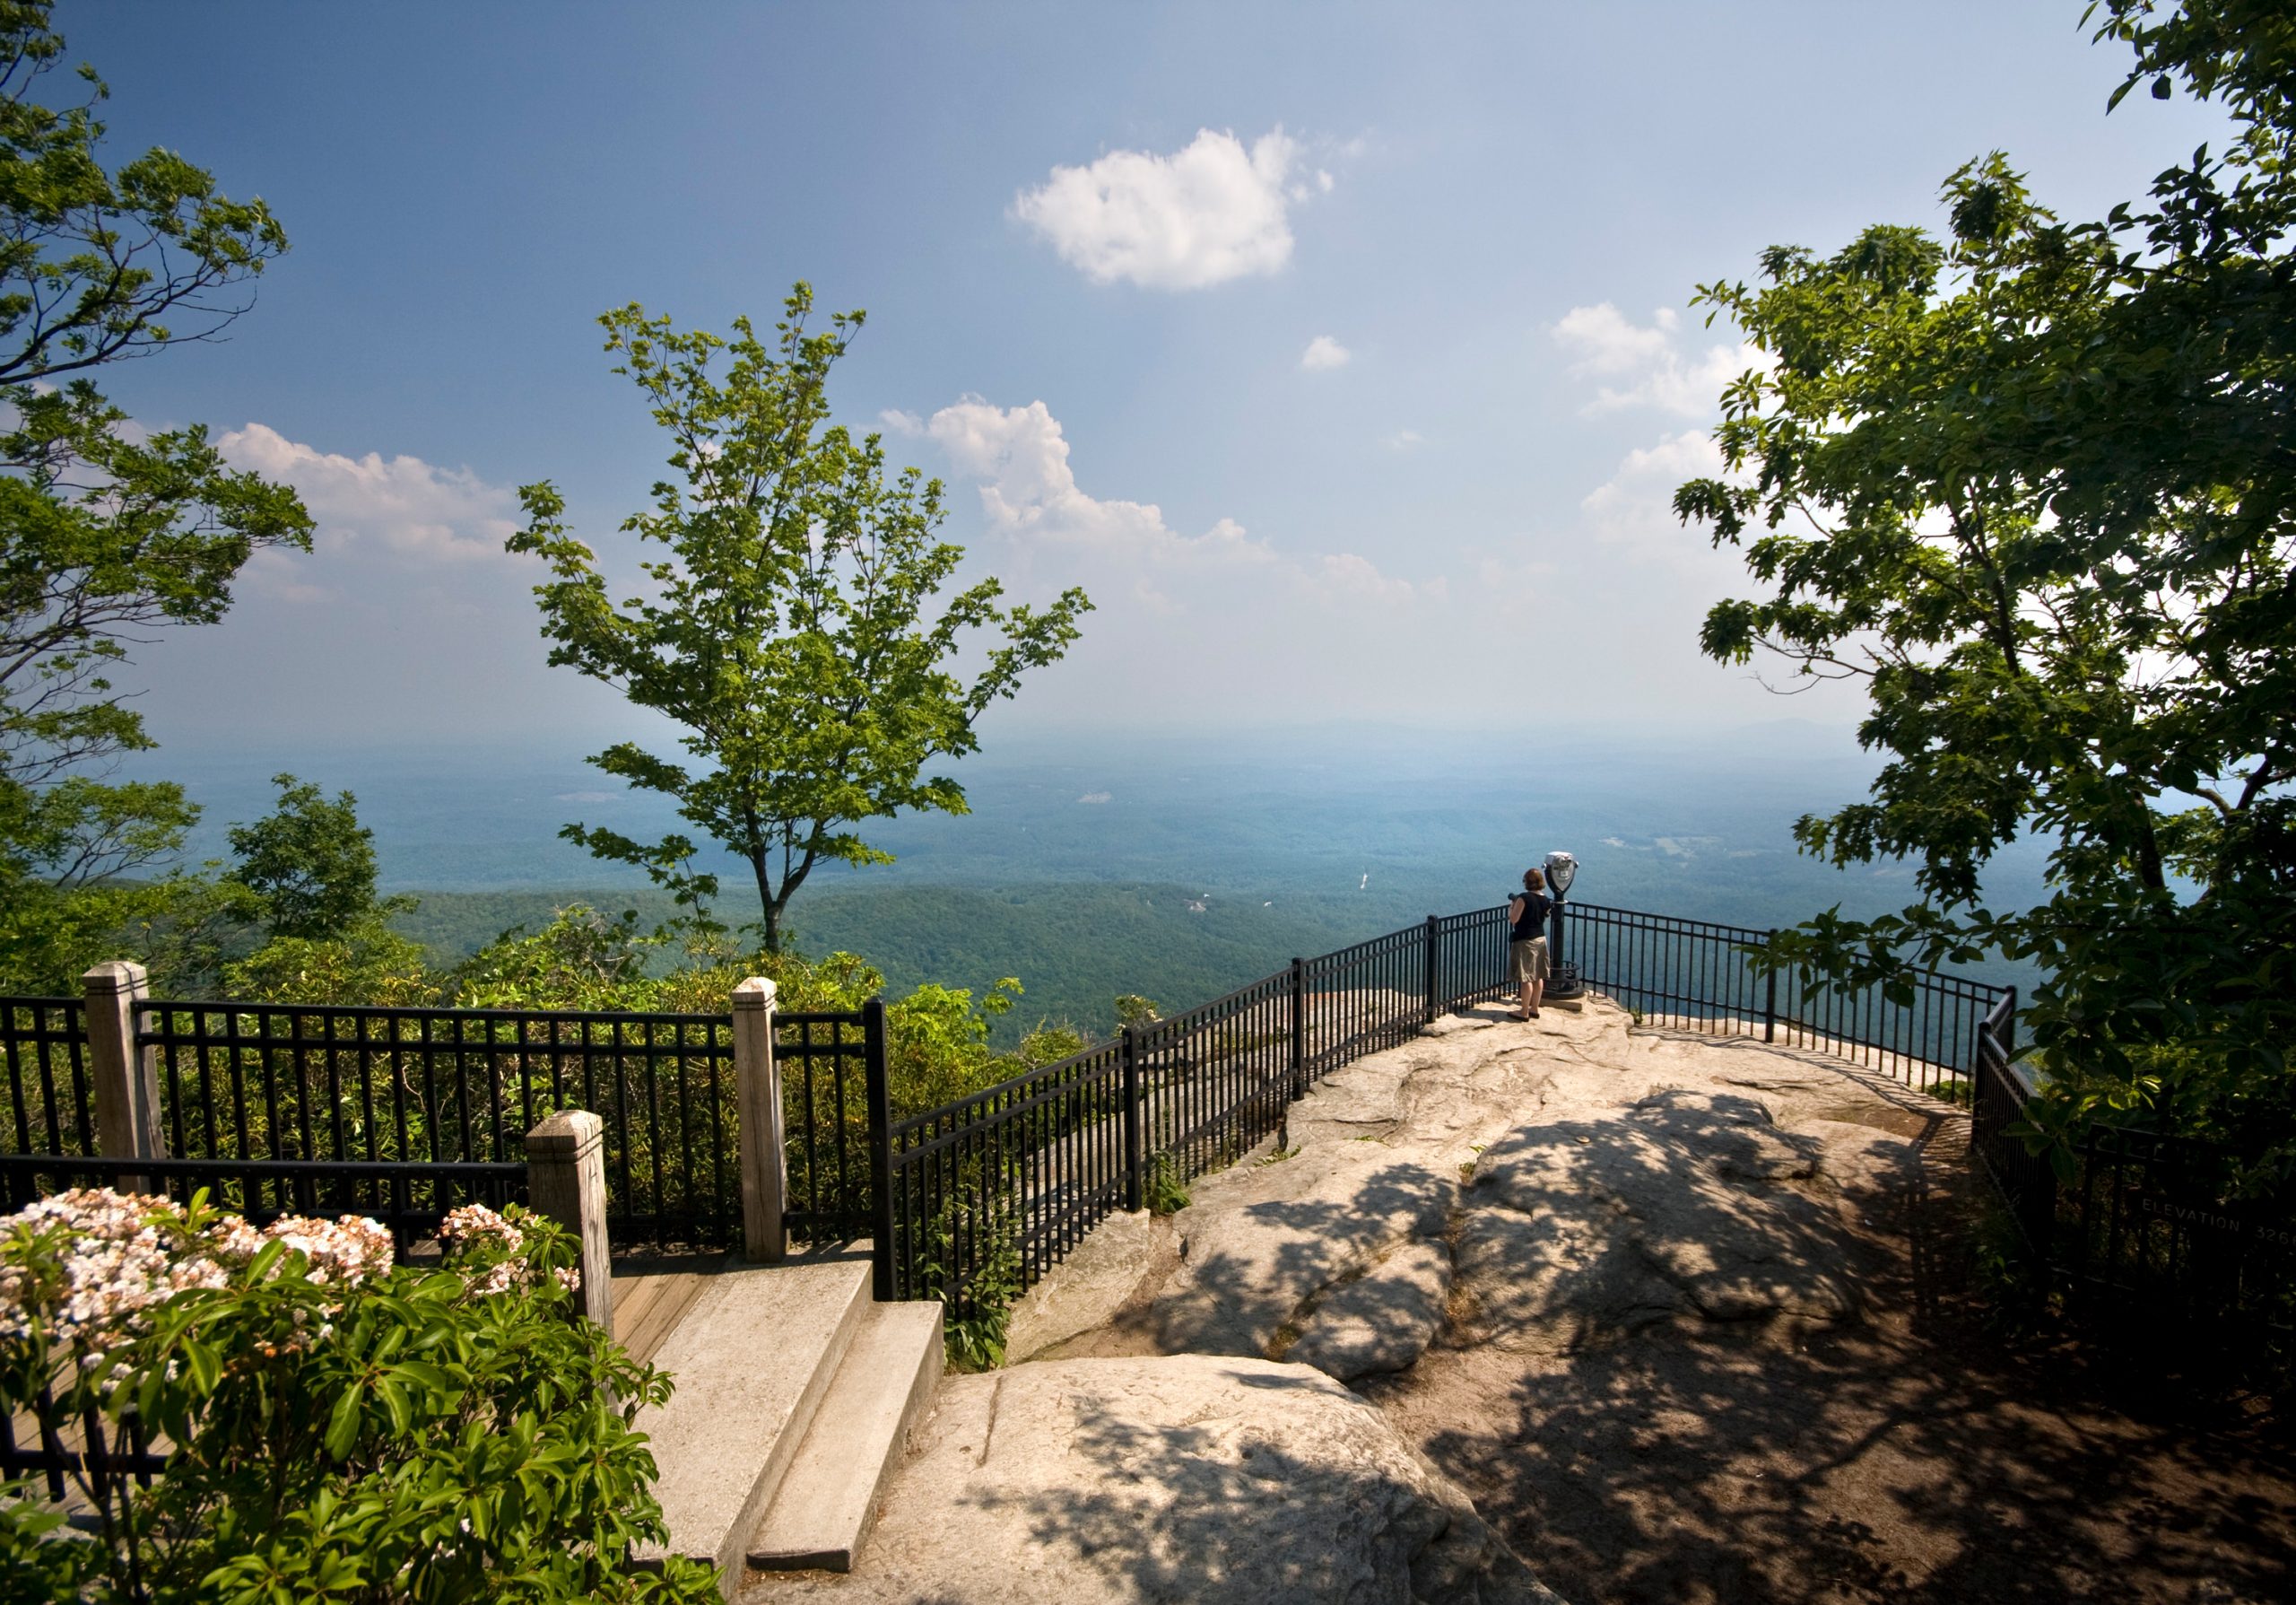 As enjoyable as evenings are at Caesar’s Head, days are even more idyllic, thanks to the 40,000-acre Mountain Bridge Wilderness Area, which surrounds the community, as well as nearby Pisgah, Nantahala, and DuPont national forests. 